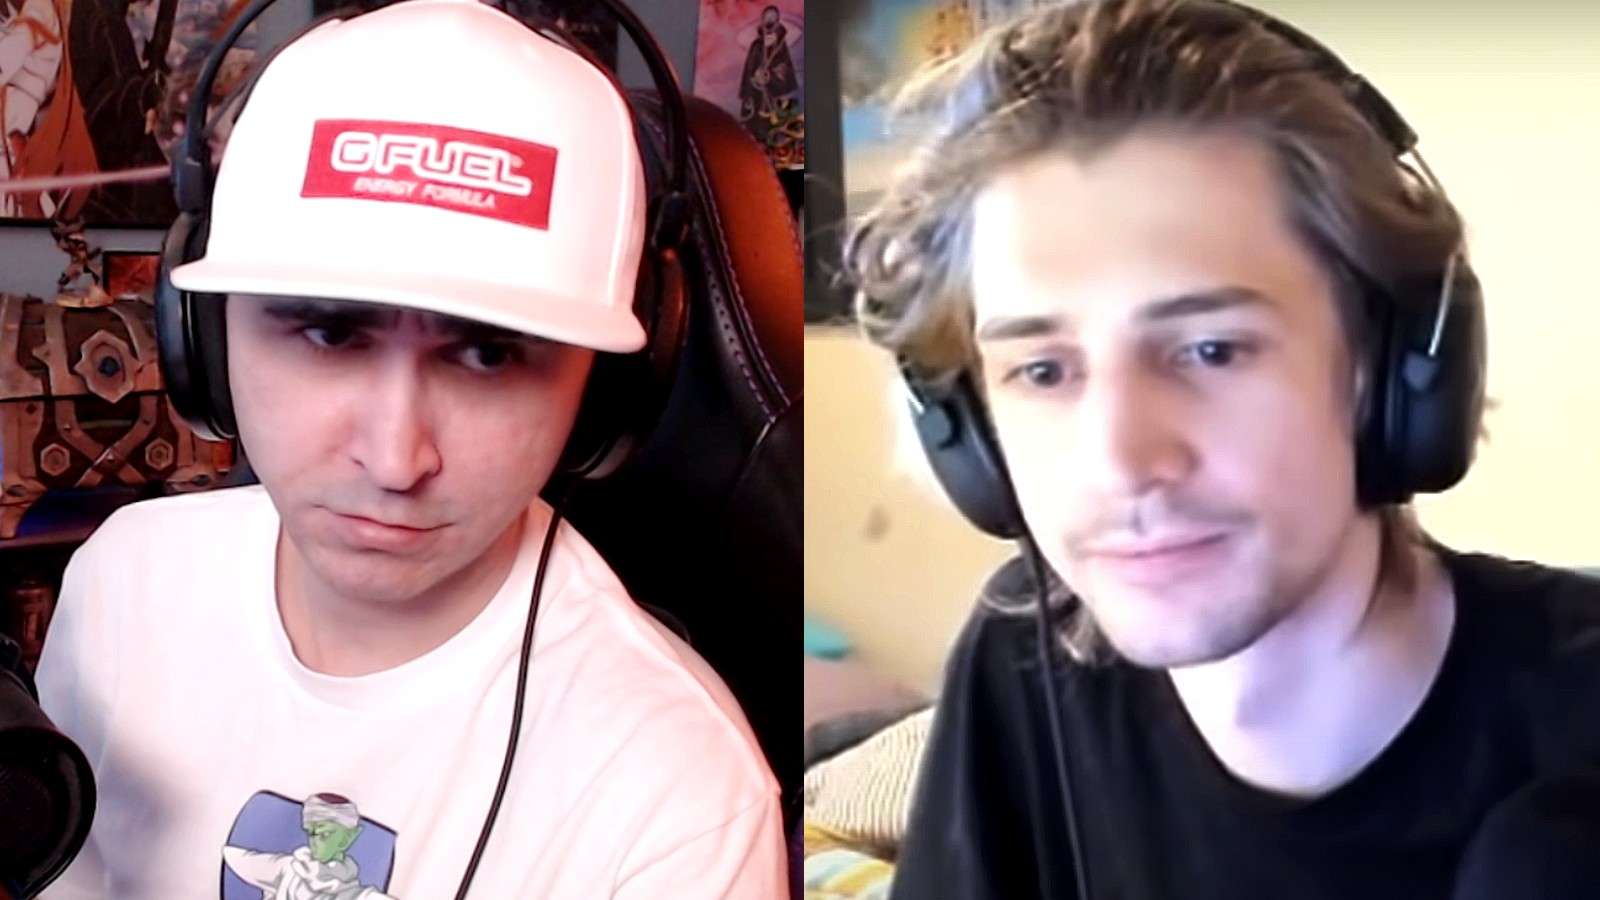 xQc and Summit1g side by side